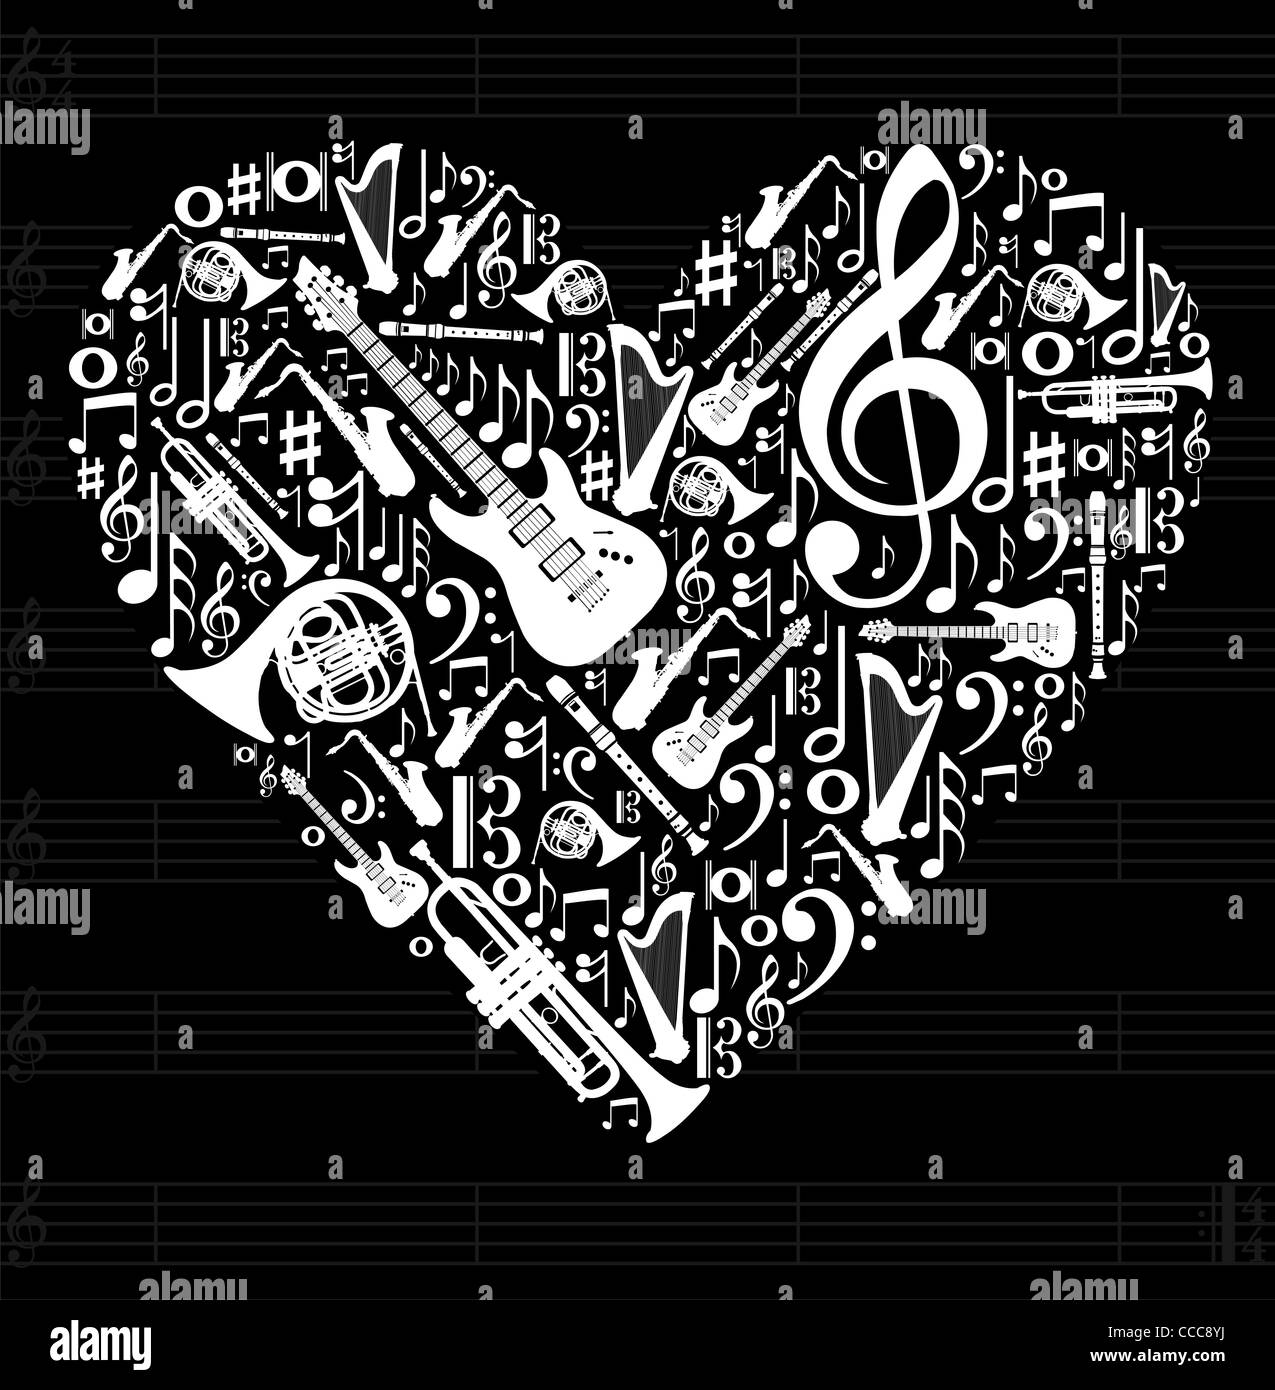 Love for music concept illustration. High contrast musical instruments icon set in heart shape background. Vector file available. Stock Photo